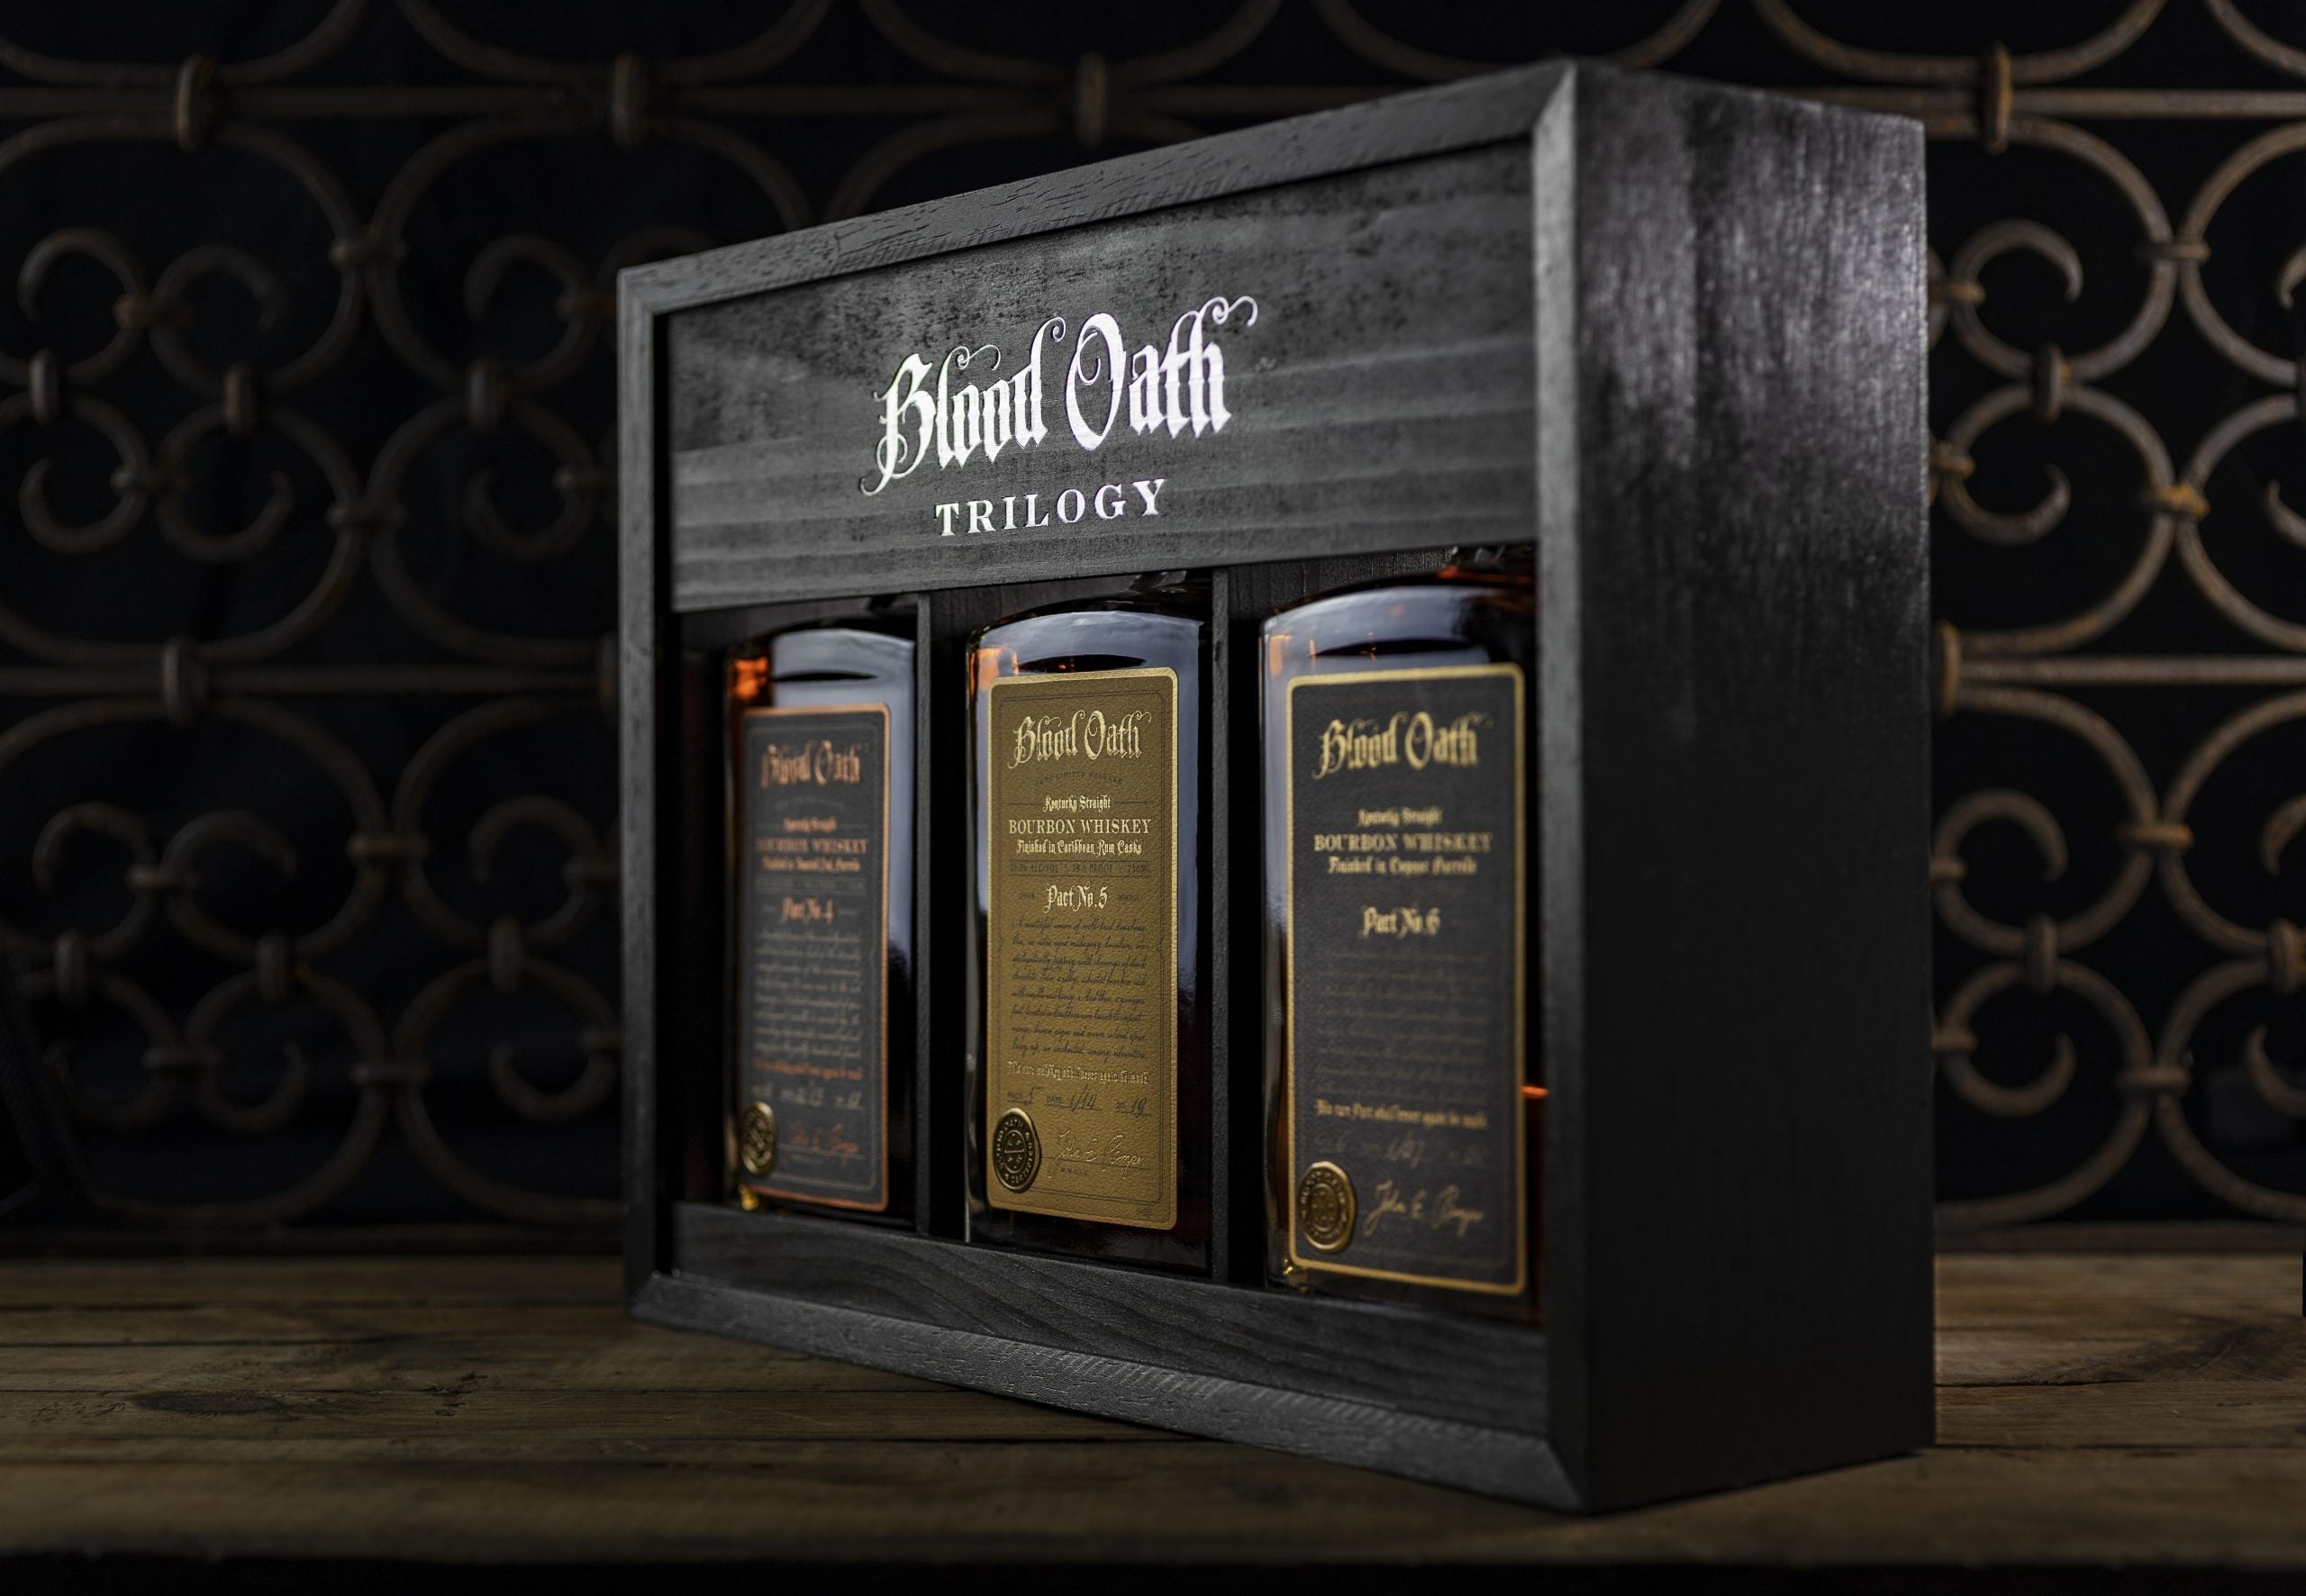 Blood Oath Pact No. 9 Kentucky Straight Bourbon Whiskey: Buy Now